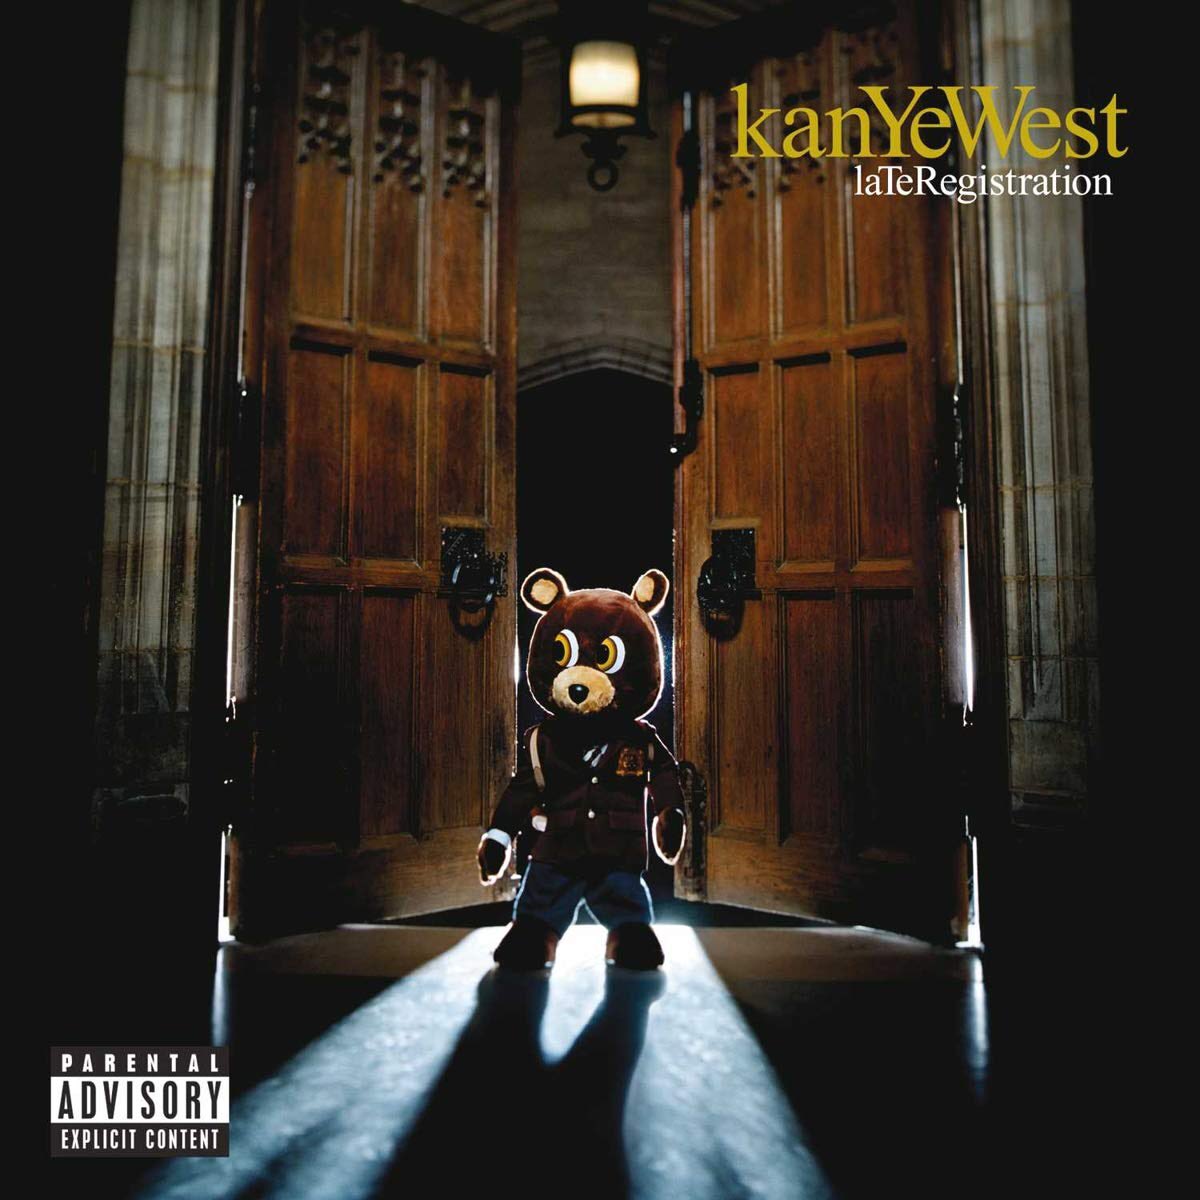 2005-Late RegistrationPossibly my favourite Ye album. With LR Ye improves his lyricism, diving into his own personal struggles and the plight of a black man making it out the hood. He also hones his production, this being the quintessential soul sample based HH album imo10/10